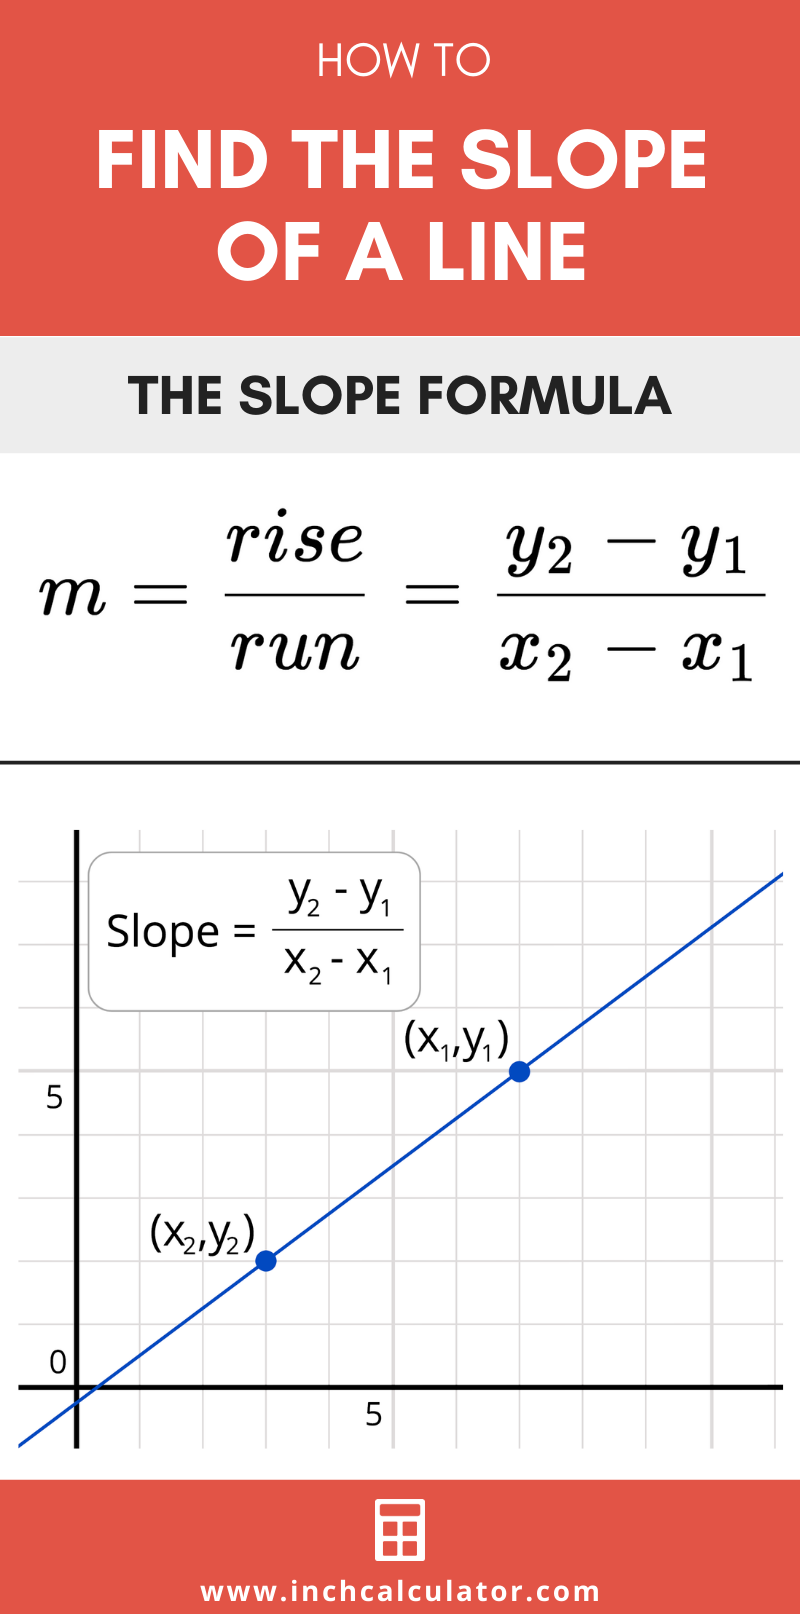 Infographic showing how to find the slope of a line using the slope formula, which states that slope is equal to rise over run